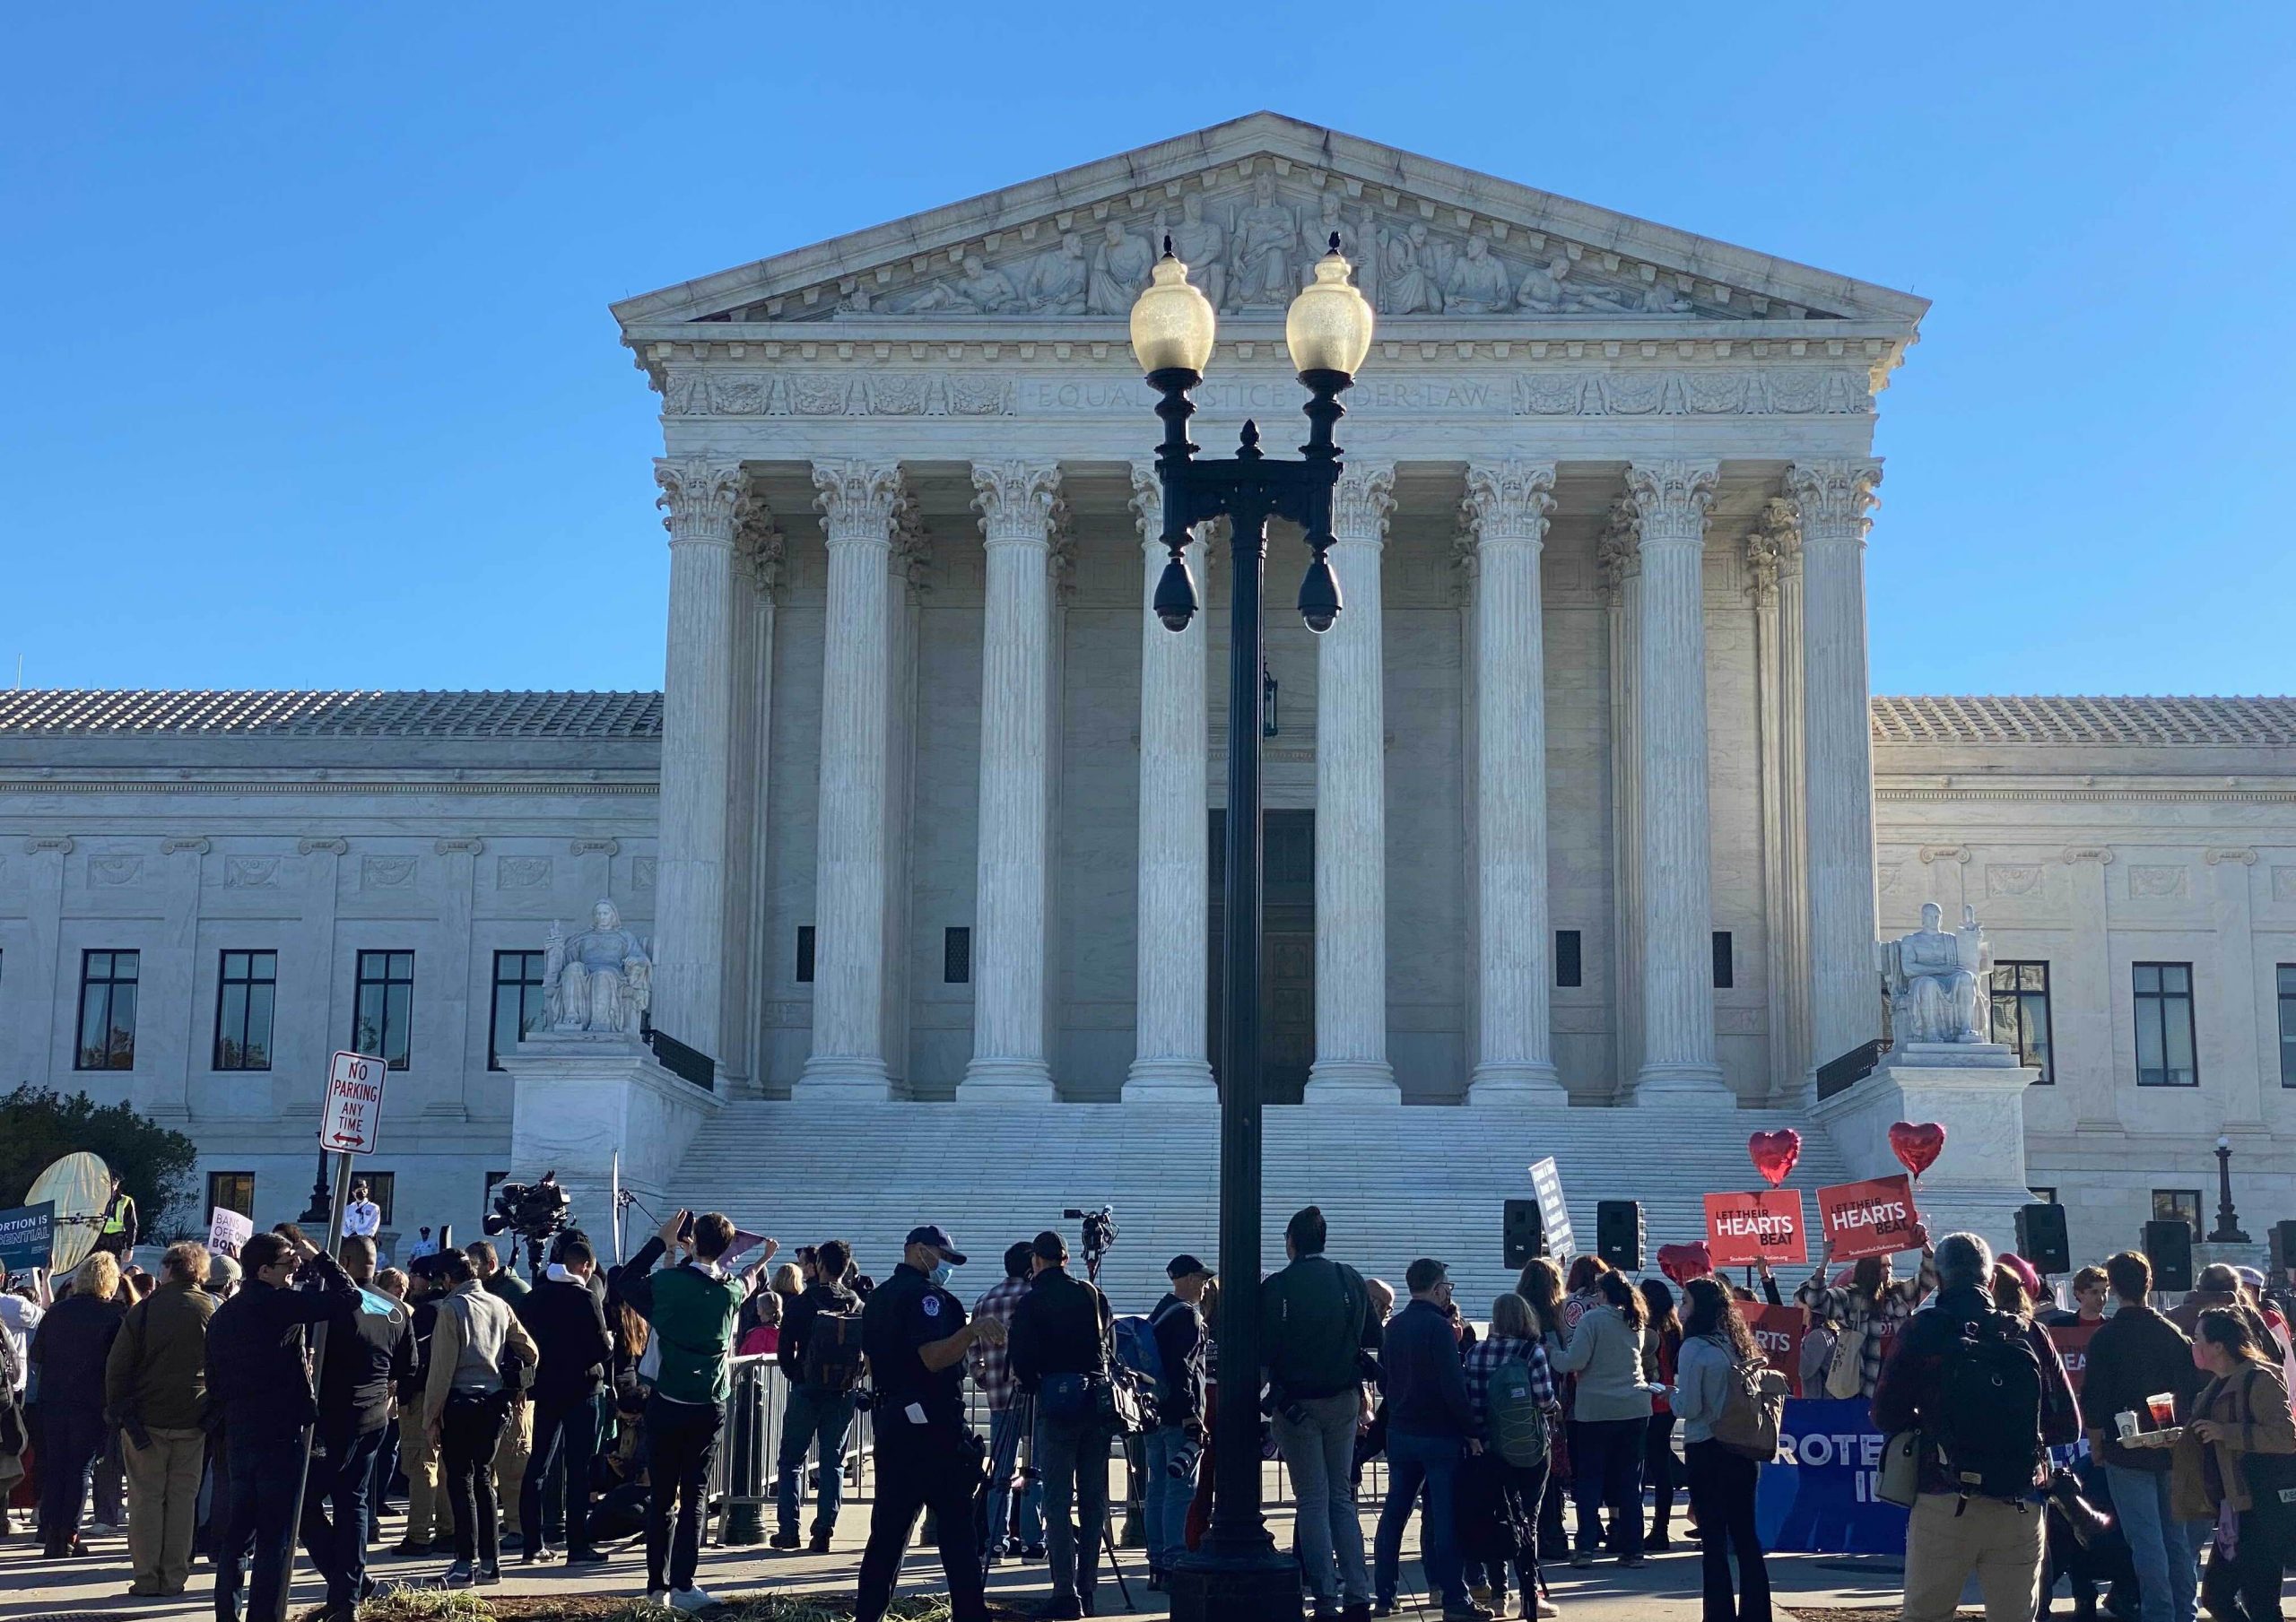 front of supreme court with crowd of people holding signs in foreground